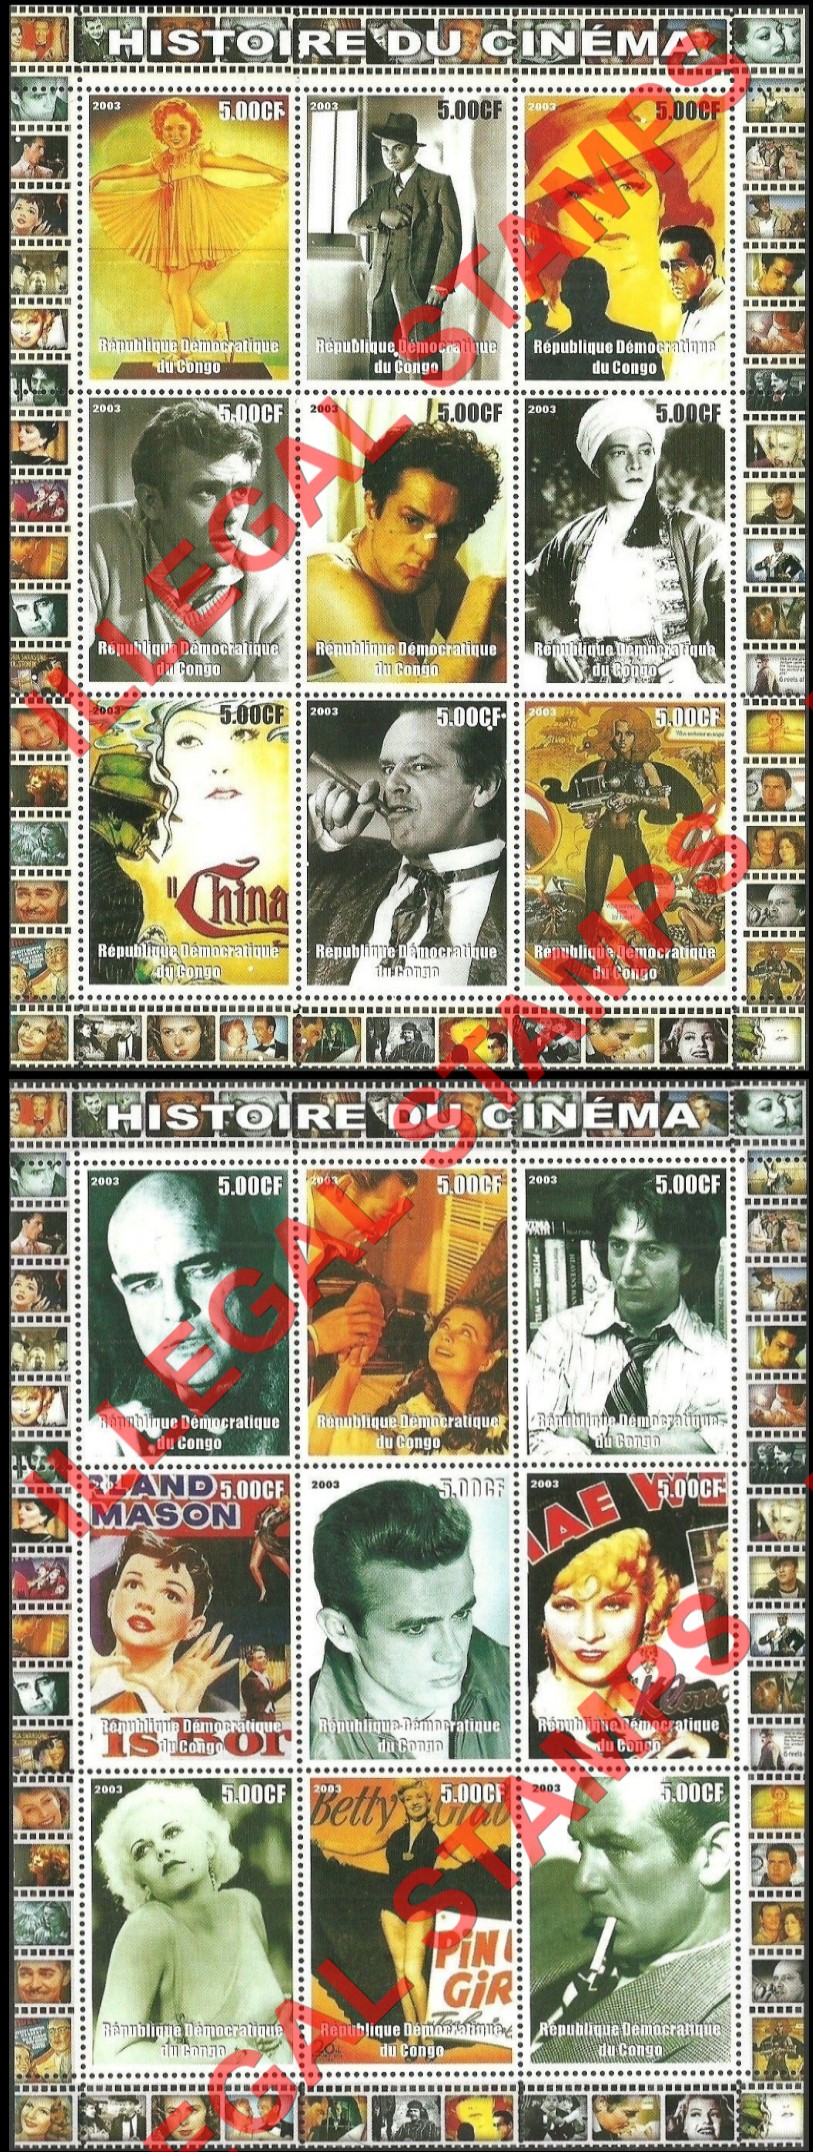 Congo Democratic Republic 2003 History of Cinema Illegal Stamp Sheets of 9 (Part 2)